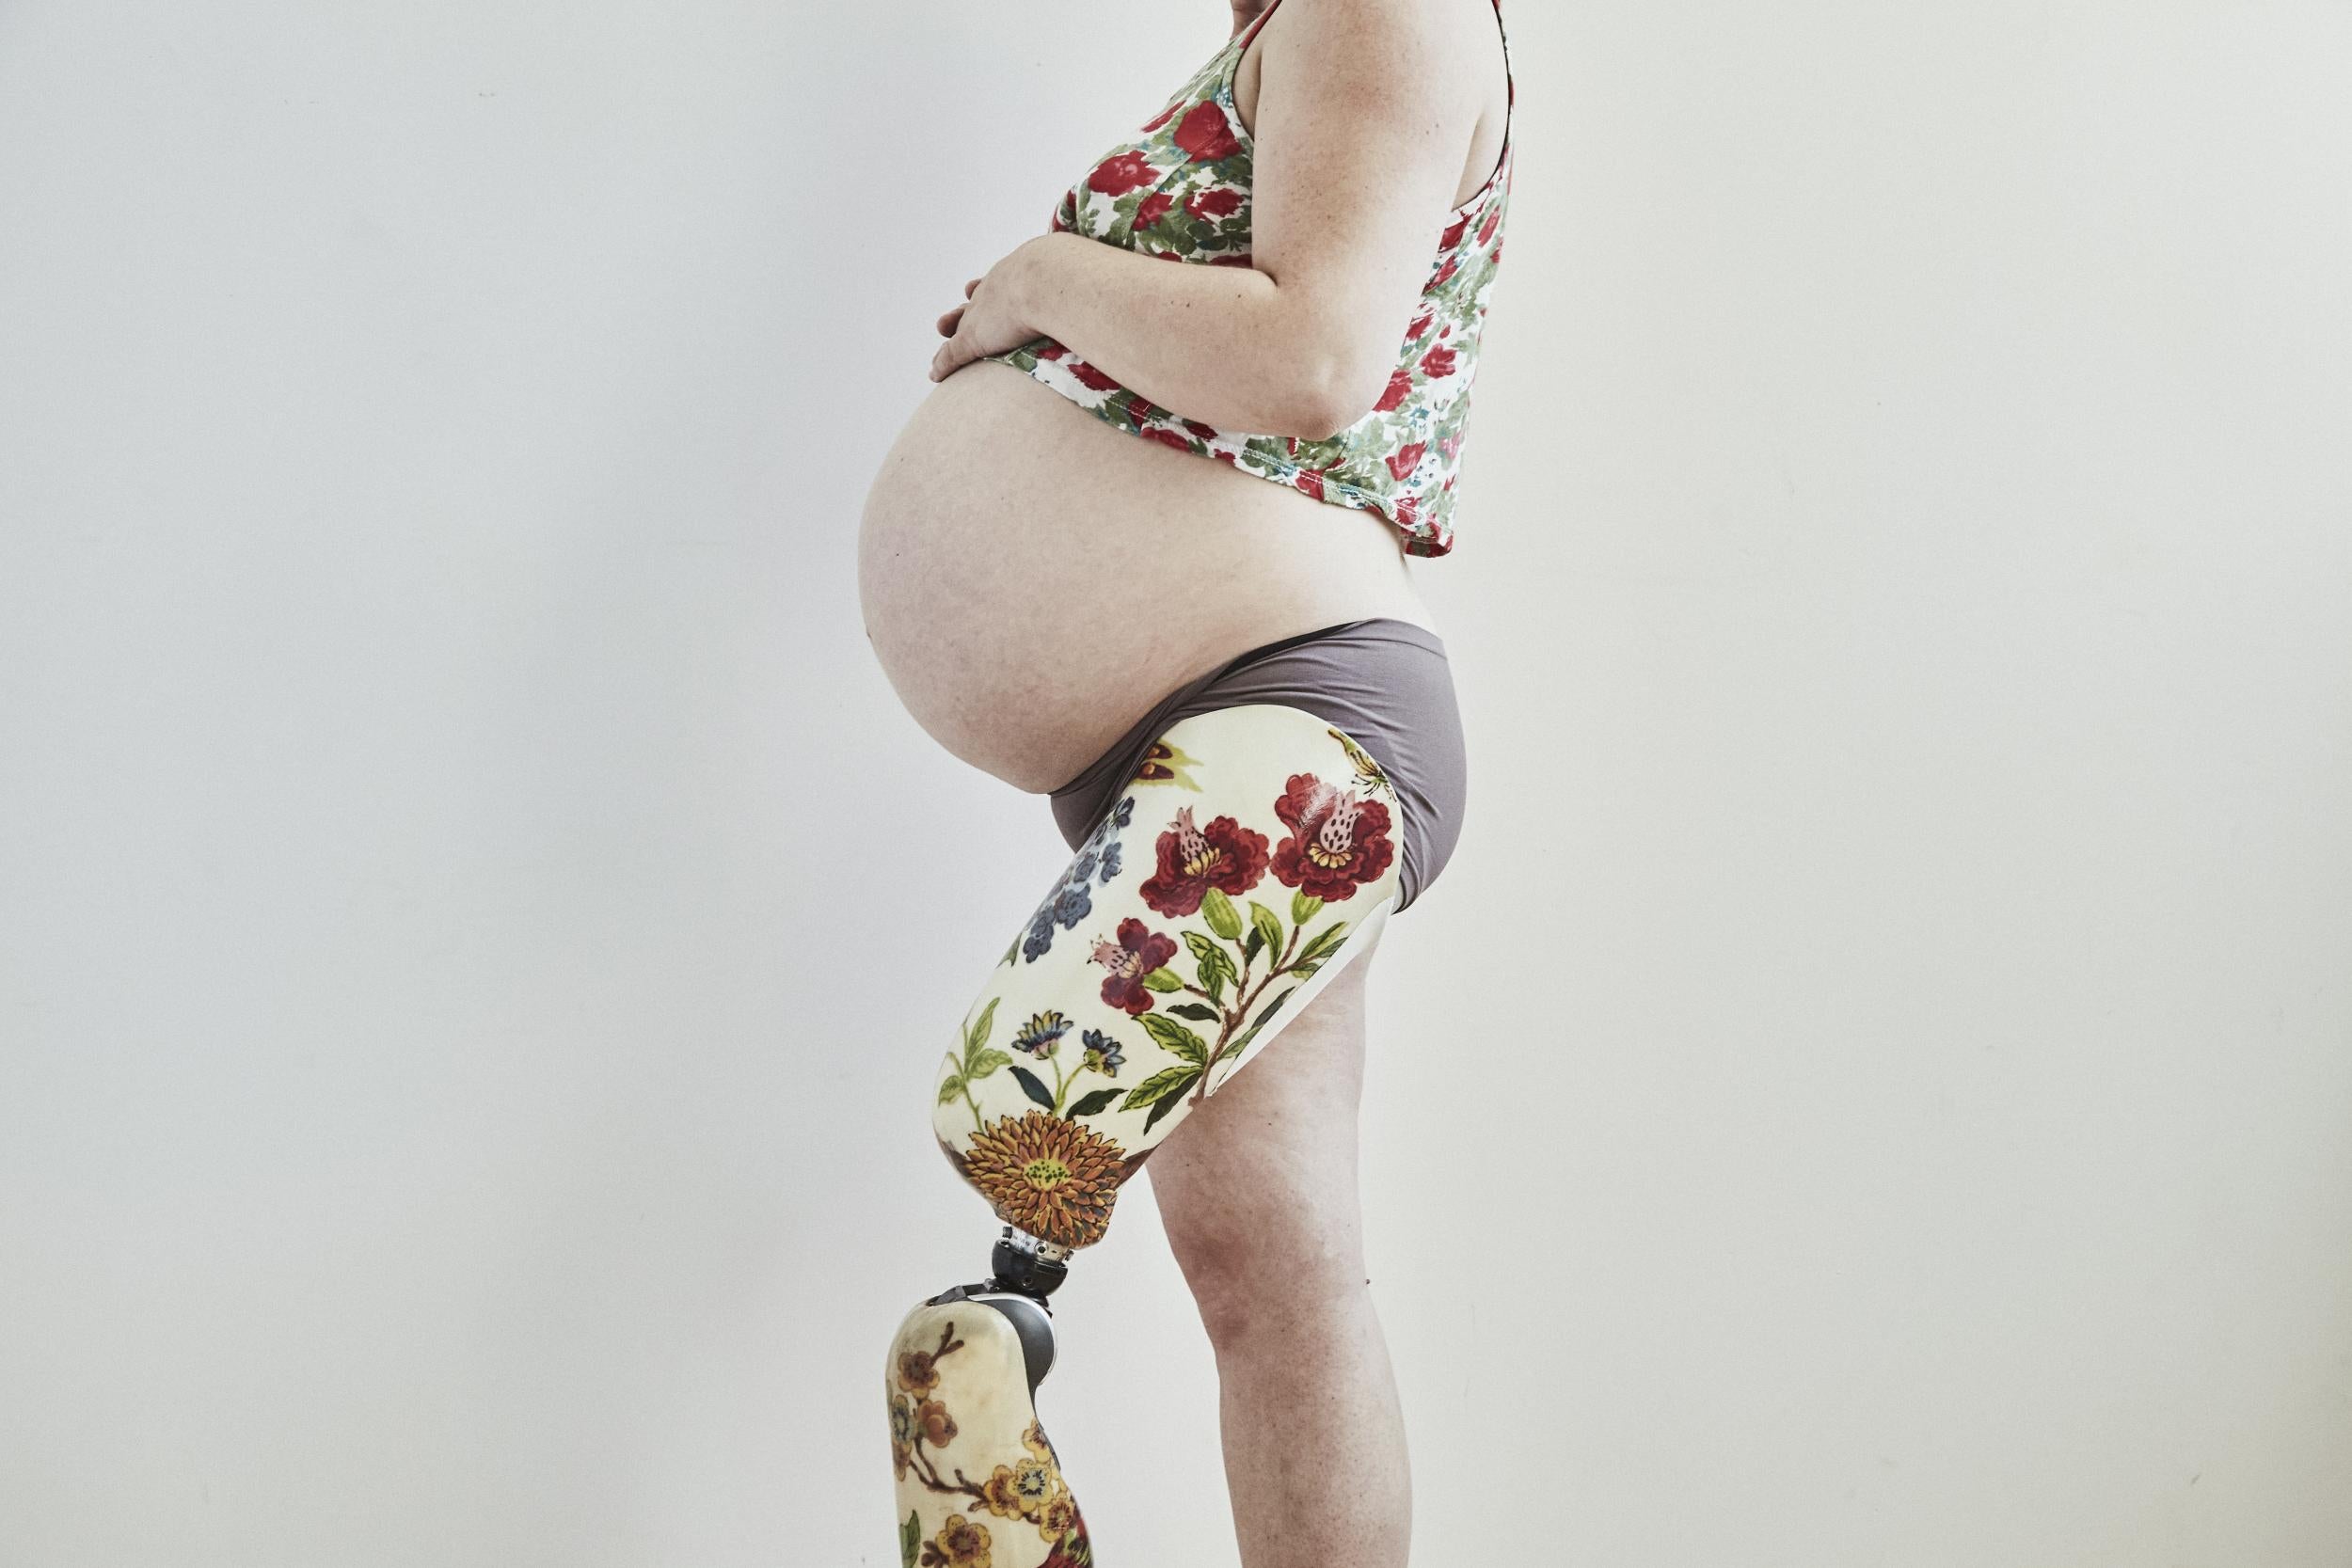 Pregnant amputee does maternity photoshoot to empower women with disabilities The Independent The Independent